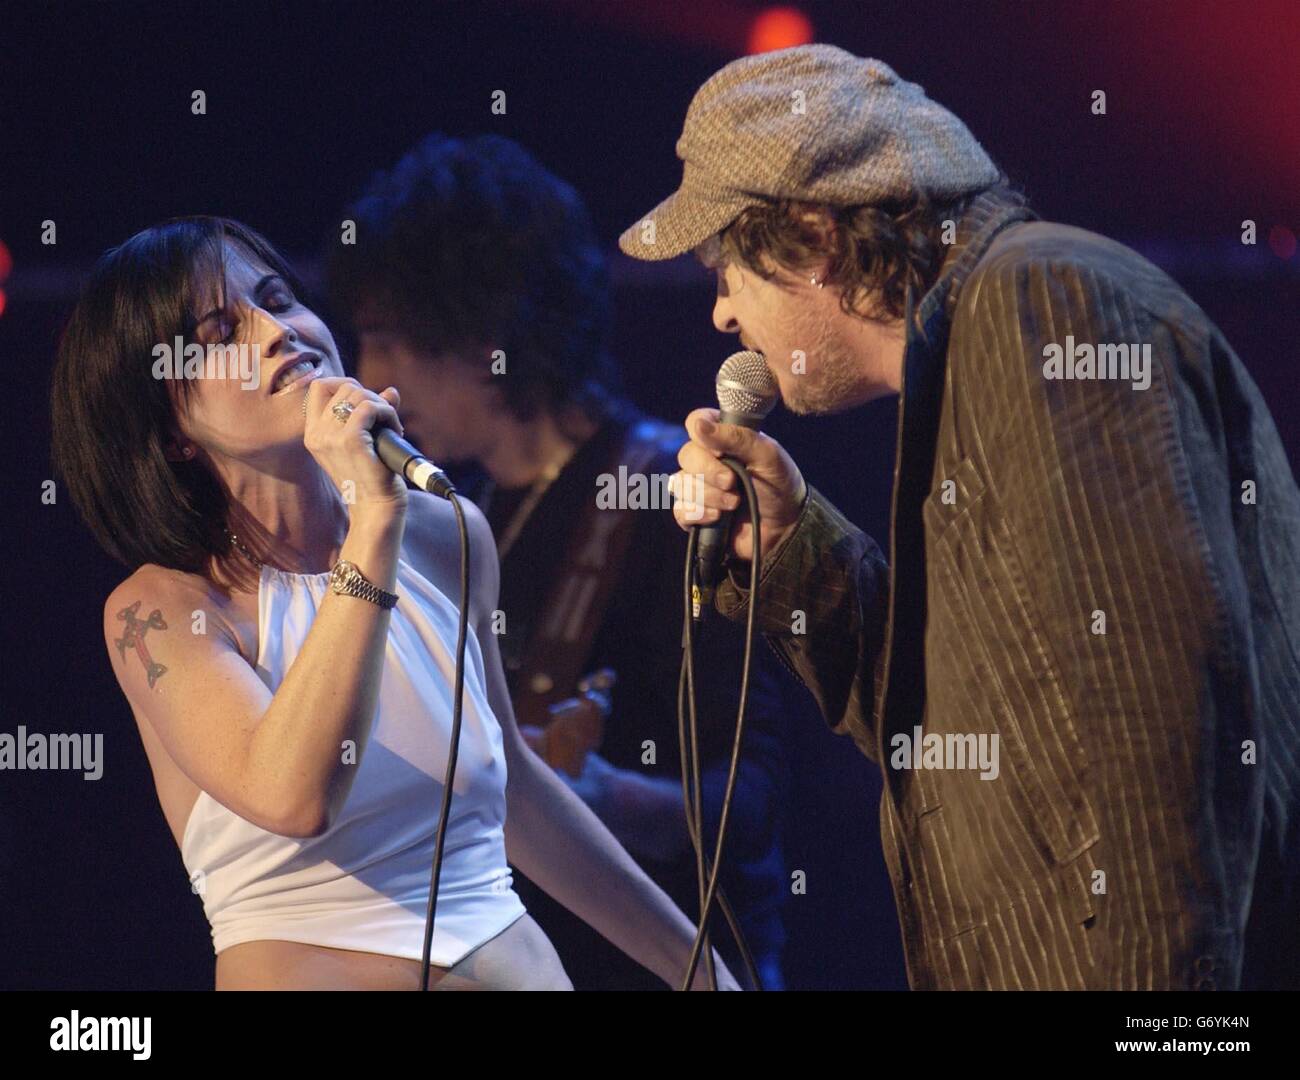 Lead singer Dolores O'Riordan from the The Cranberries joins Italian singer Zucchero onstage during a benefit show in aid of the United Nations UNHCR refugees fund held at the Royal Albert hall, central London. Stock Photo